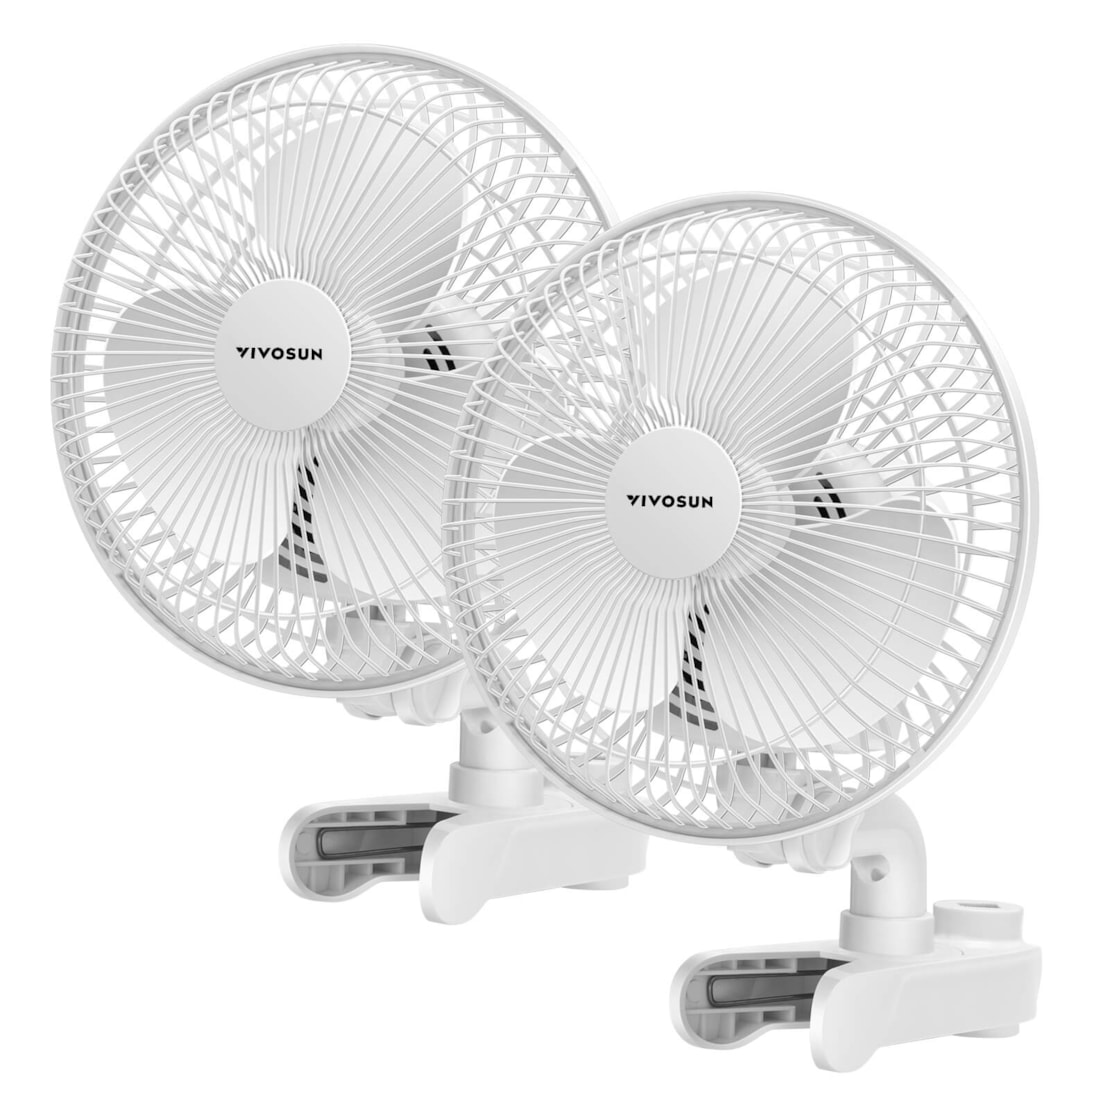 VIVOSUN AeroWave A6 Patented Clip-On Fan with 2-Speed Adjustment, Horizontal Vertical Oscillation, 2 Pack, White